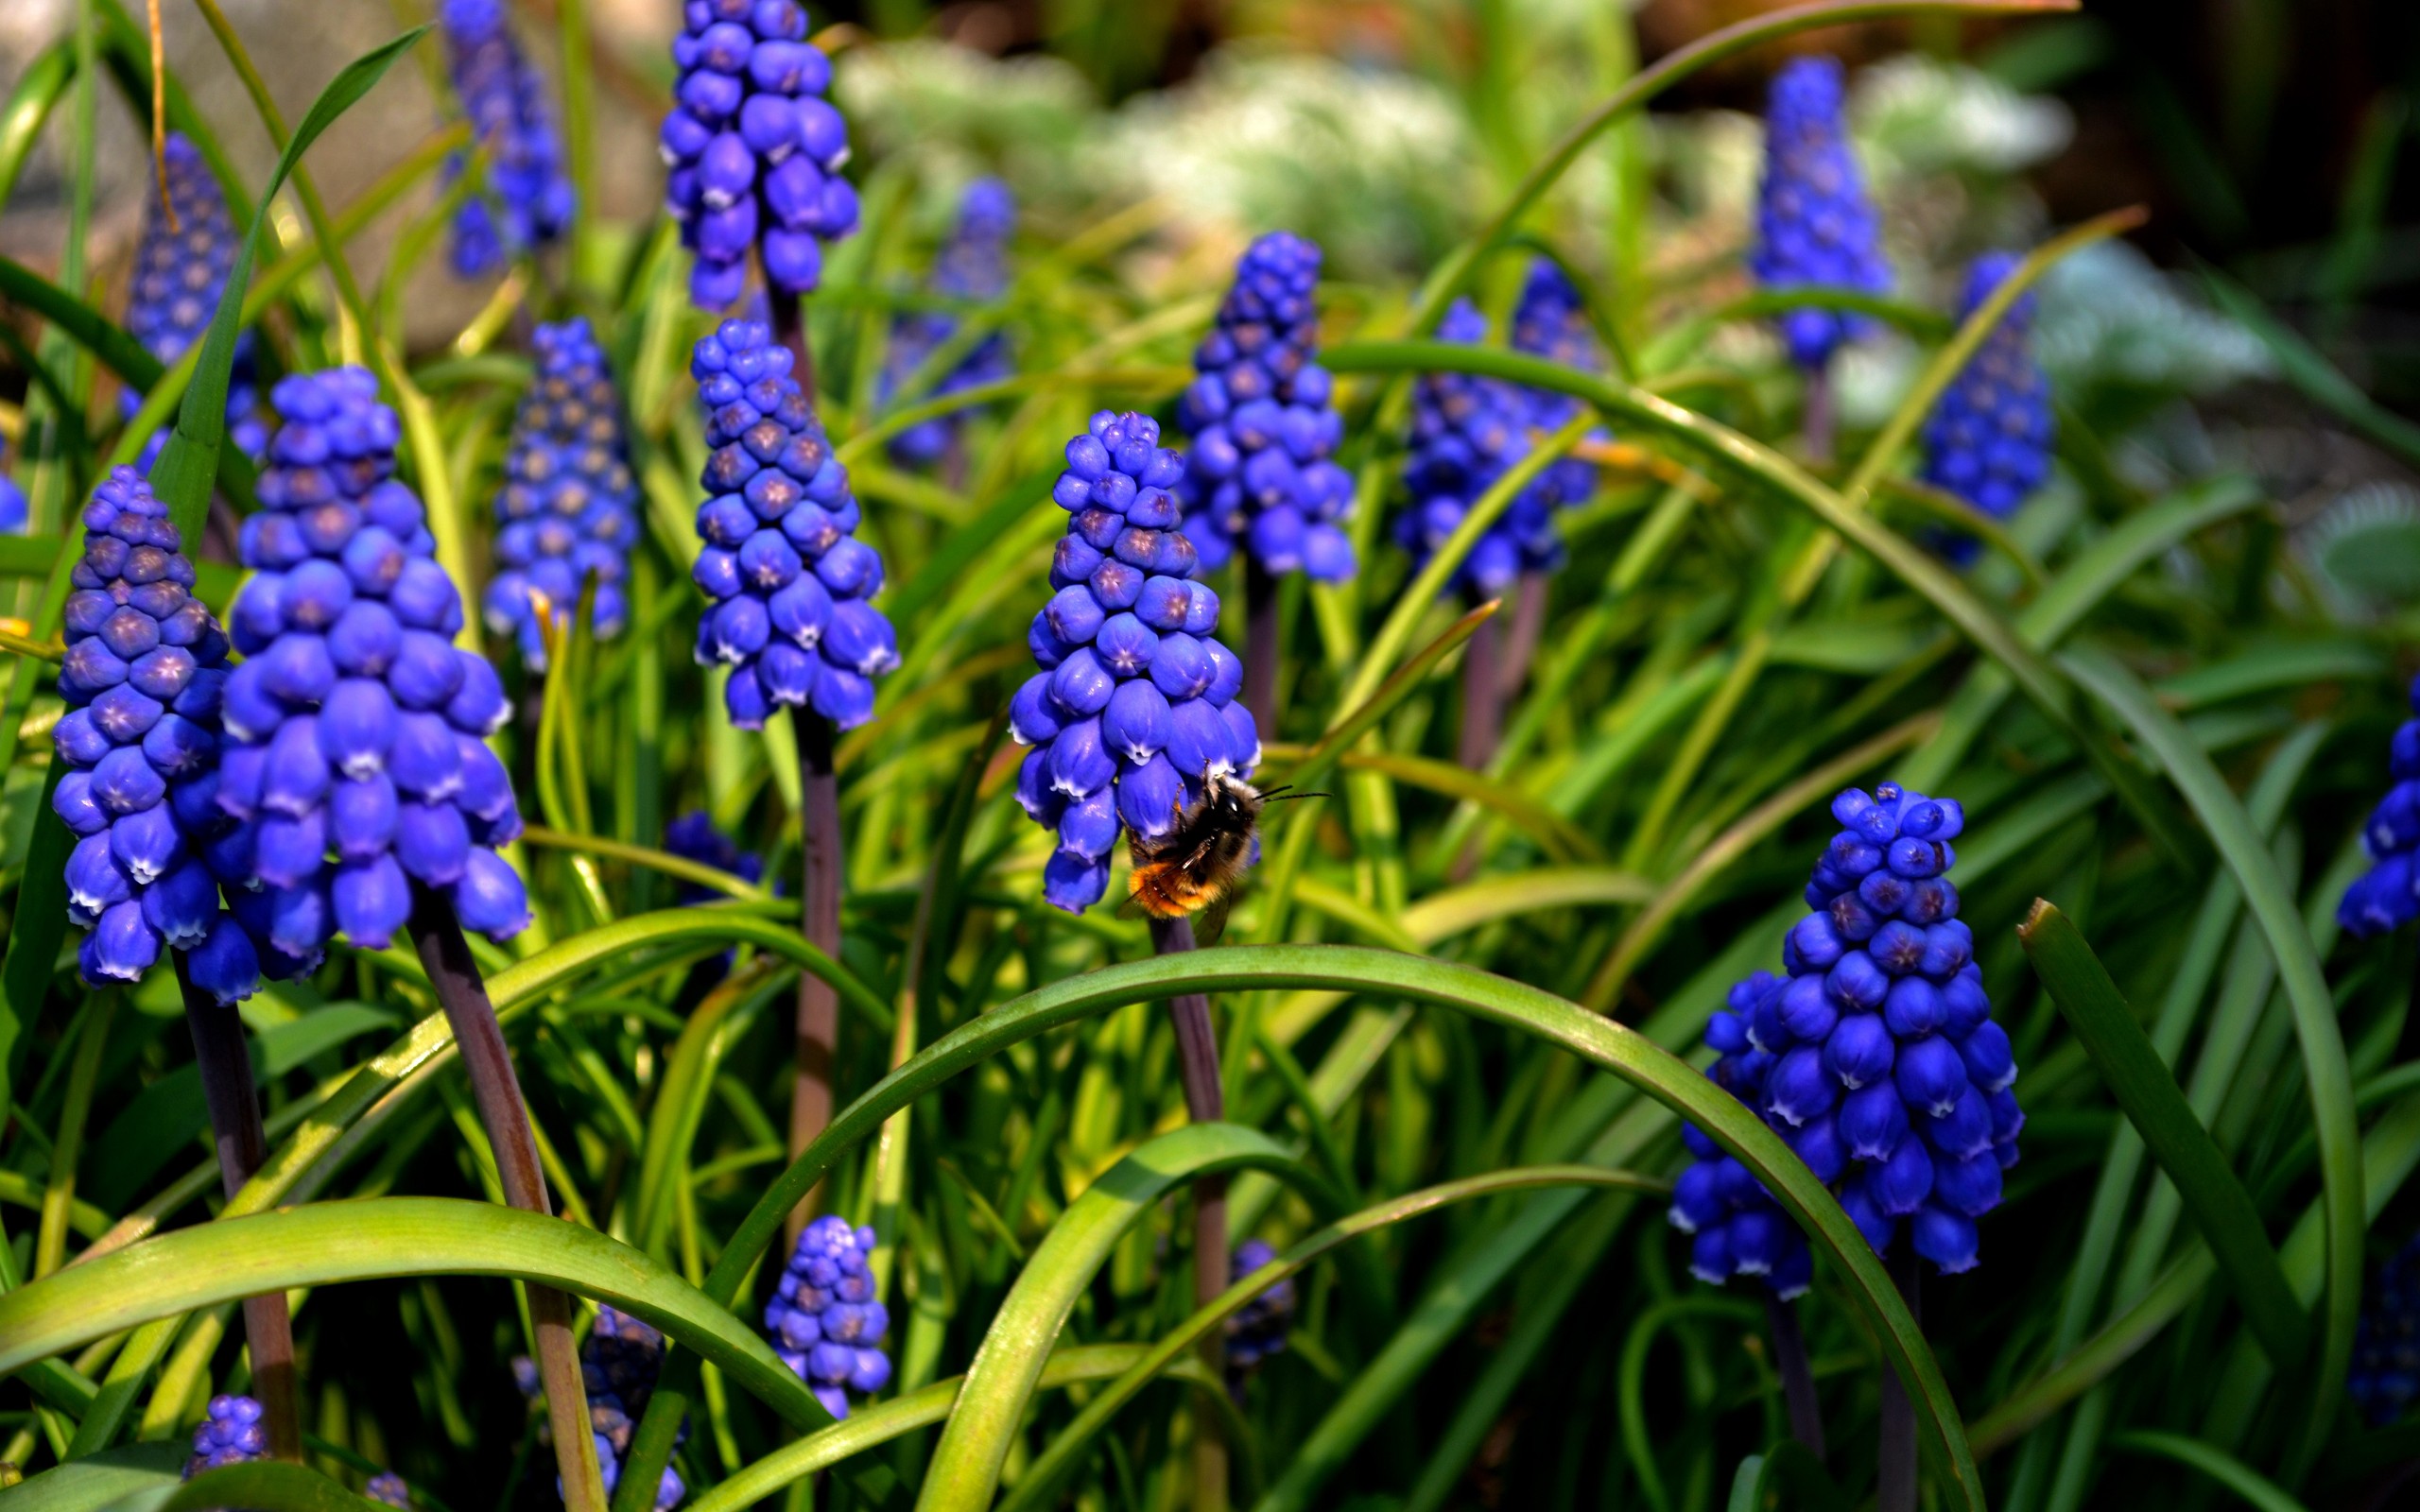 General 2560x1600 nature bees flowers muscari blue flowers plants insect animals closeup macro